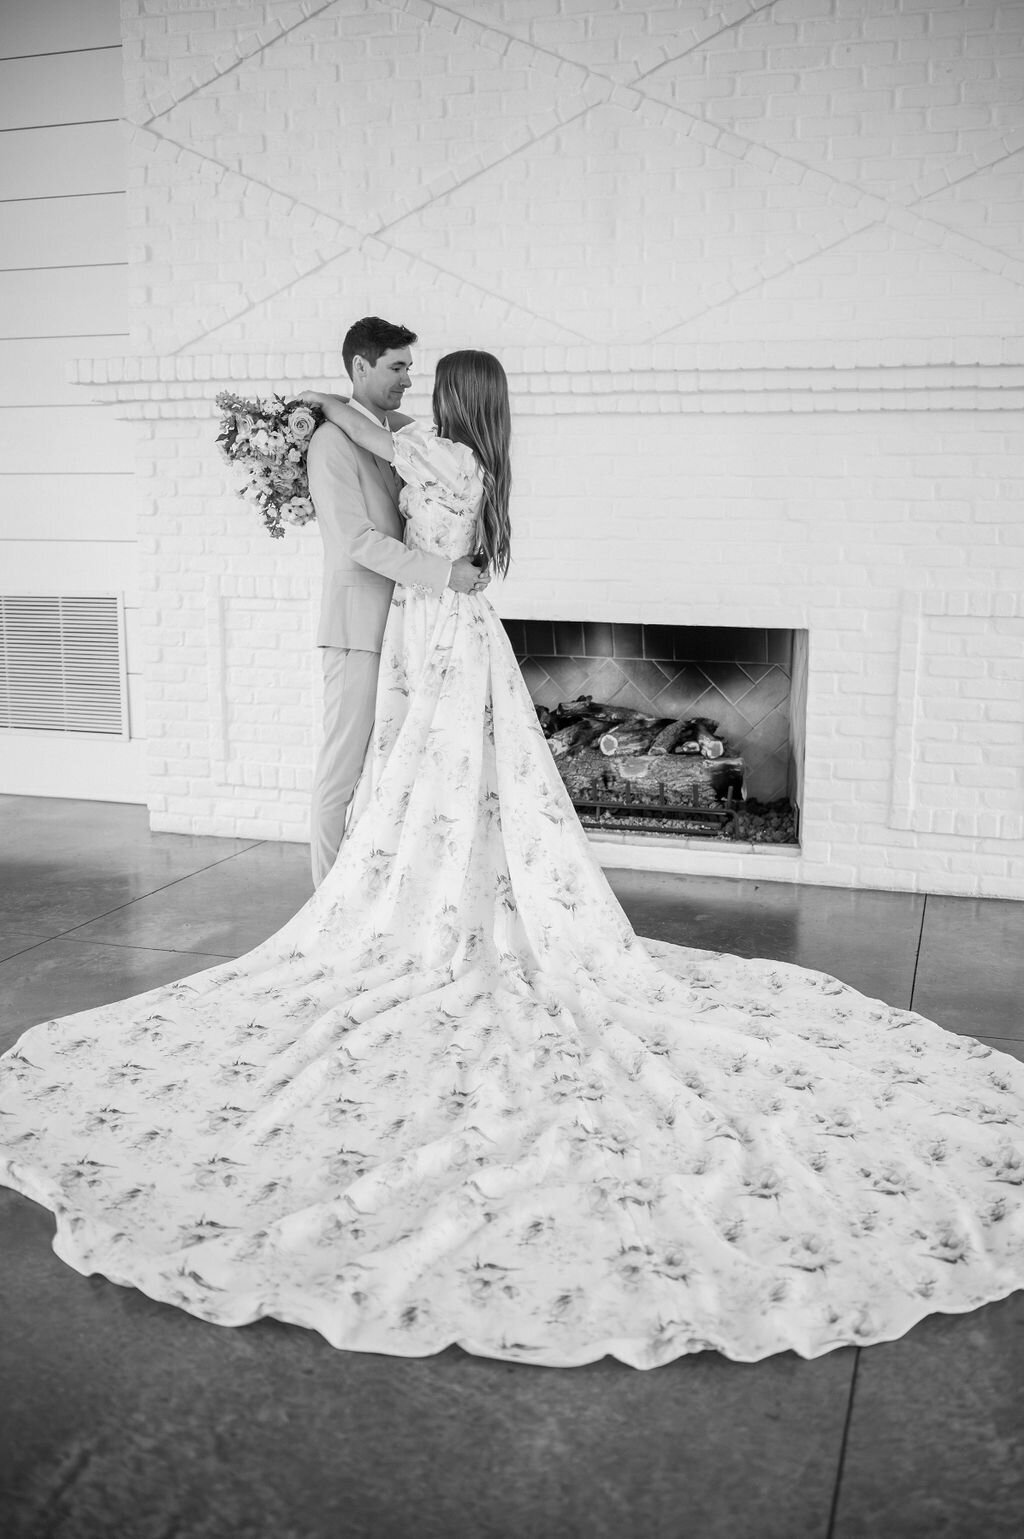 Bride wearing a floral printed wedding dress with a long, dramatic train